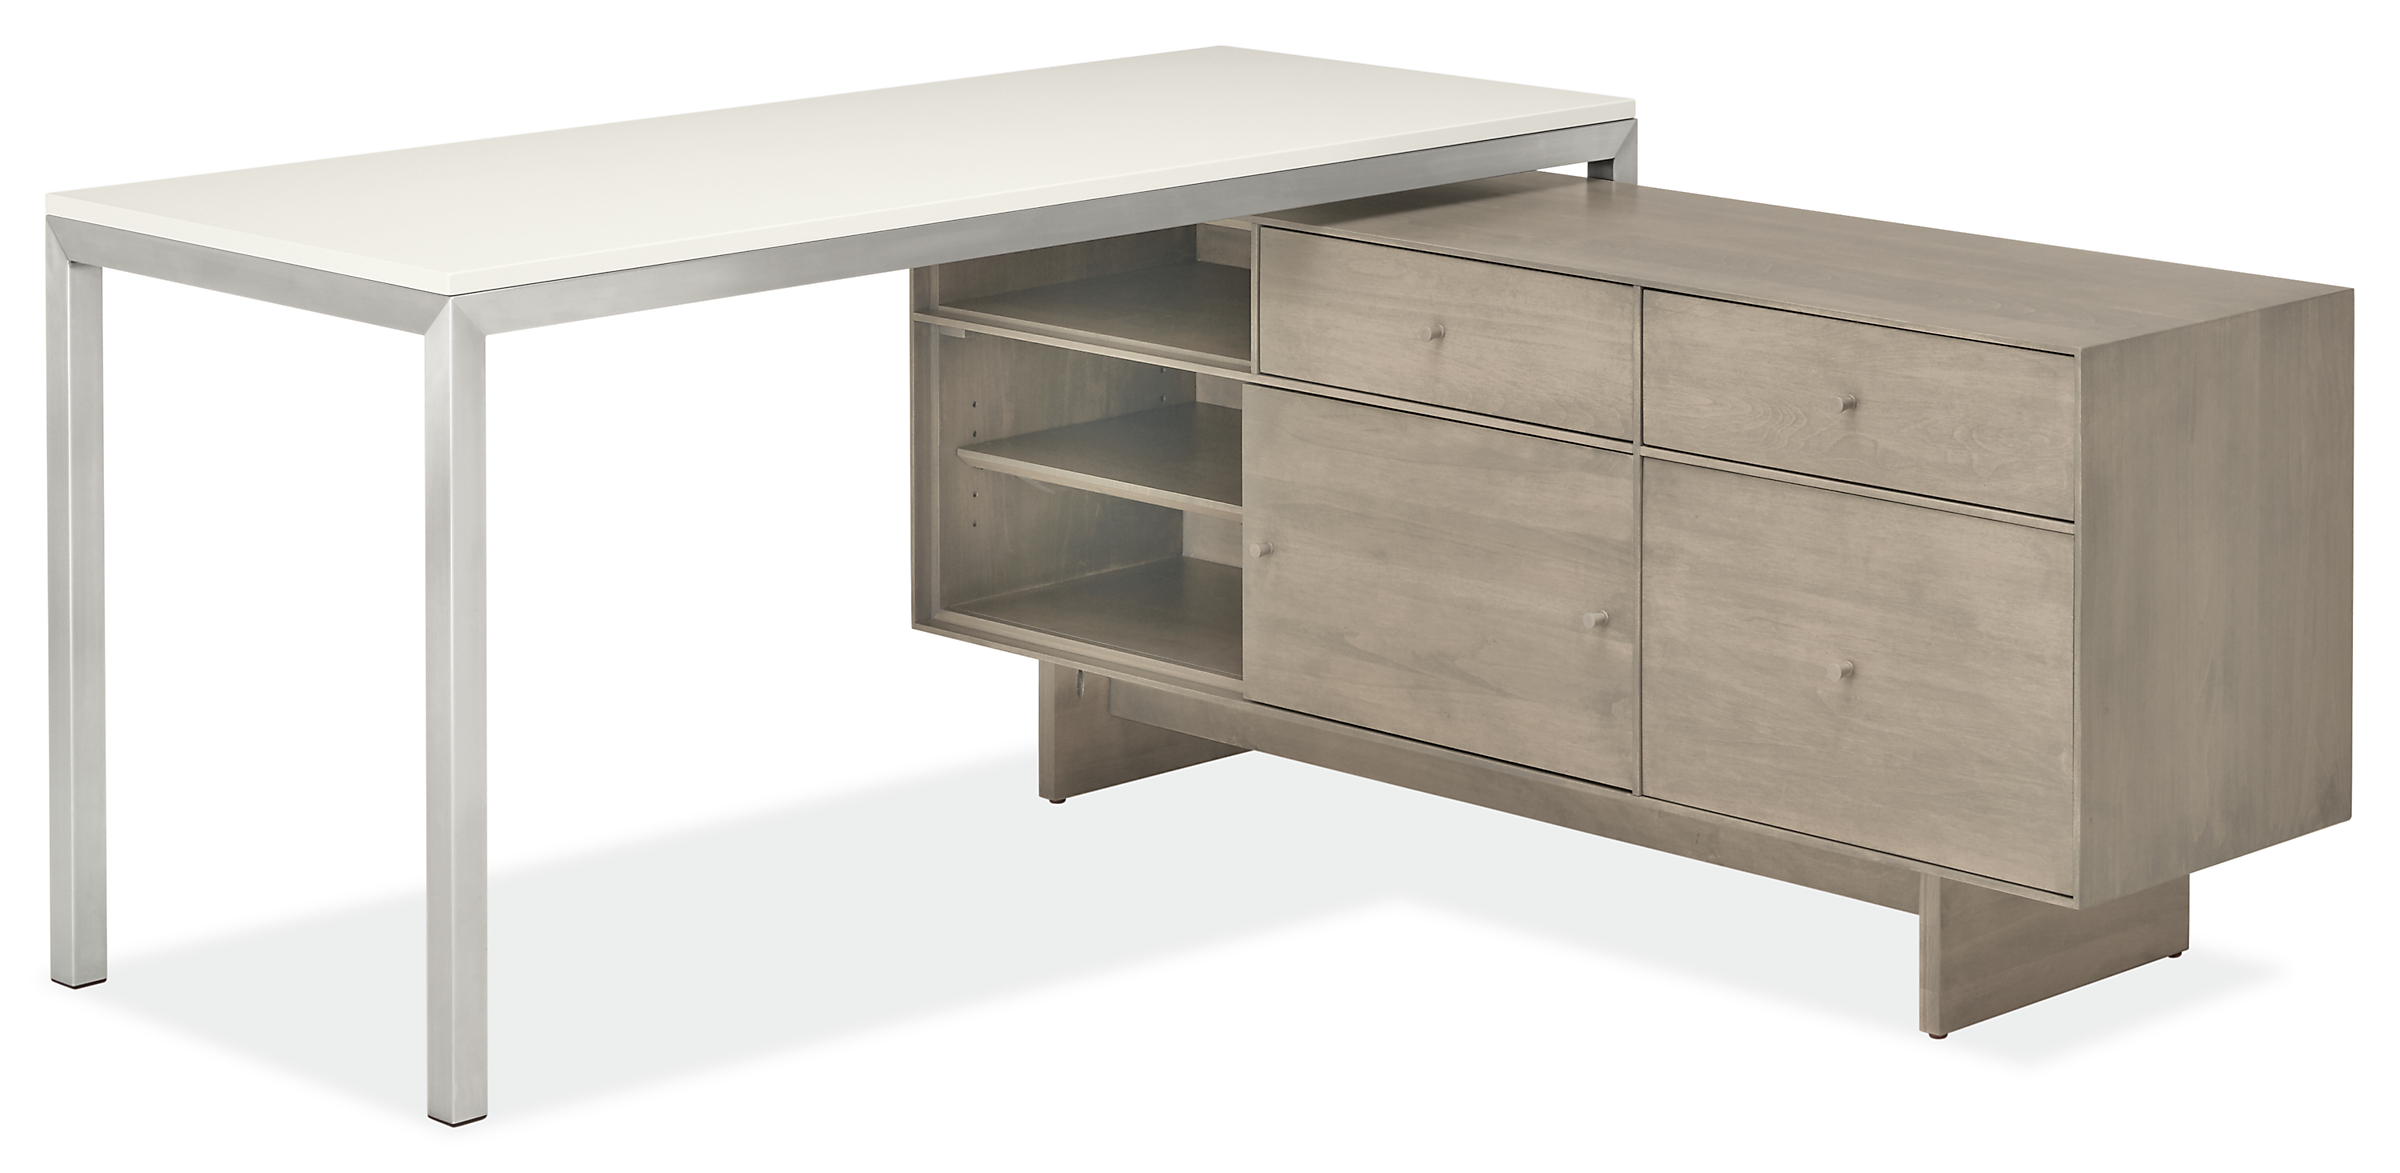 Combination of Hudson right-file drawer bench underneath Portica desk in L-shaped configuration.